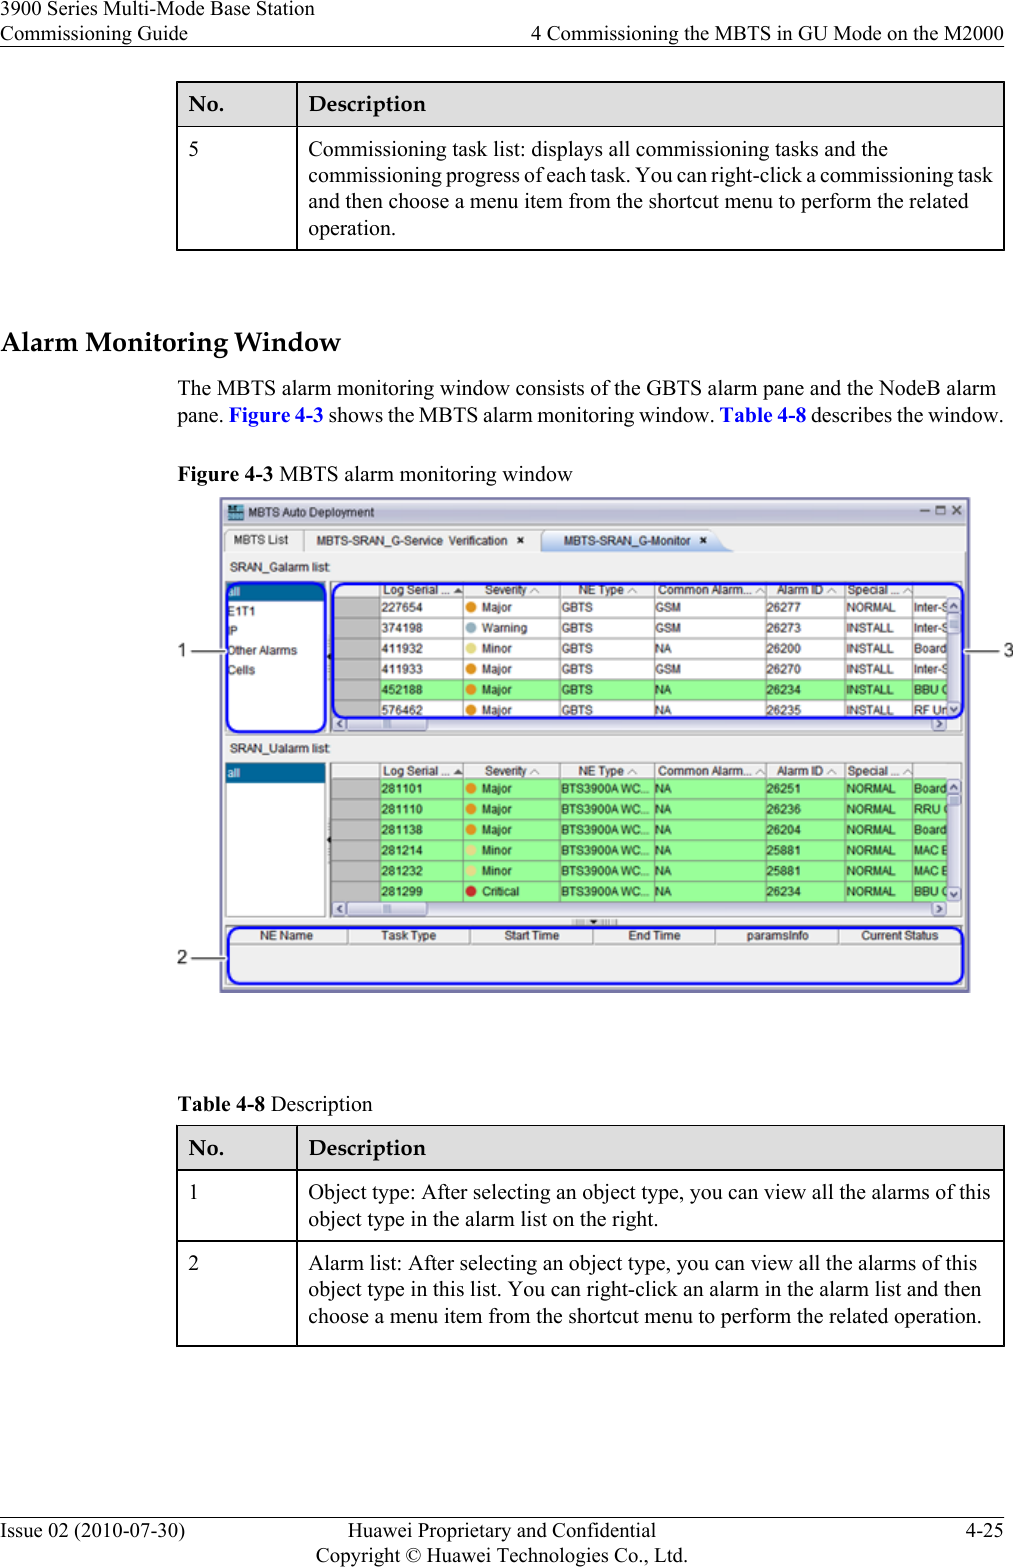 No. Description5Commissioning task list: displays all commissioning tasks and thecommissioning progress of each task. You can right-click a commissioning taskand then choose a menu item from the shortcut menu to perform the relatedoperation. Alarm Monitoring WindowThe MBTS alarm monitoring window consists of the GBTS alarm pane and the NodeB alarmpane. Figure 4-3 shows the MBTS alarm monitoring window. Table 4-8 describes the window.Figure 4-3 MBTS alarm monitoring window Table 4-8 DescriptionNo. Description1Object type: After selecting an object type, you can view all the alarms of thisobject type in the alarm list on the right.2 Alarm list: After selecting an object type, you can view all the alarms of thisobject type in this list. You can right-click an alarm in the alarm list and thenchoose a menu item from the shortcut menu to perform the related operation.3900 Series Multi-Mode Base StationCommissioning Guide 4 Commissioning the MBTS in GU Mode on the M2000Issue 02 (2010-07-30) Huawei Proprietary and ConfidentialCopyright © Huawei Technologies Co., Ltd.4-25